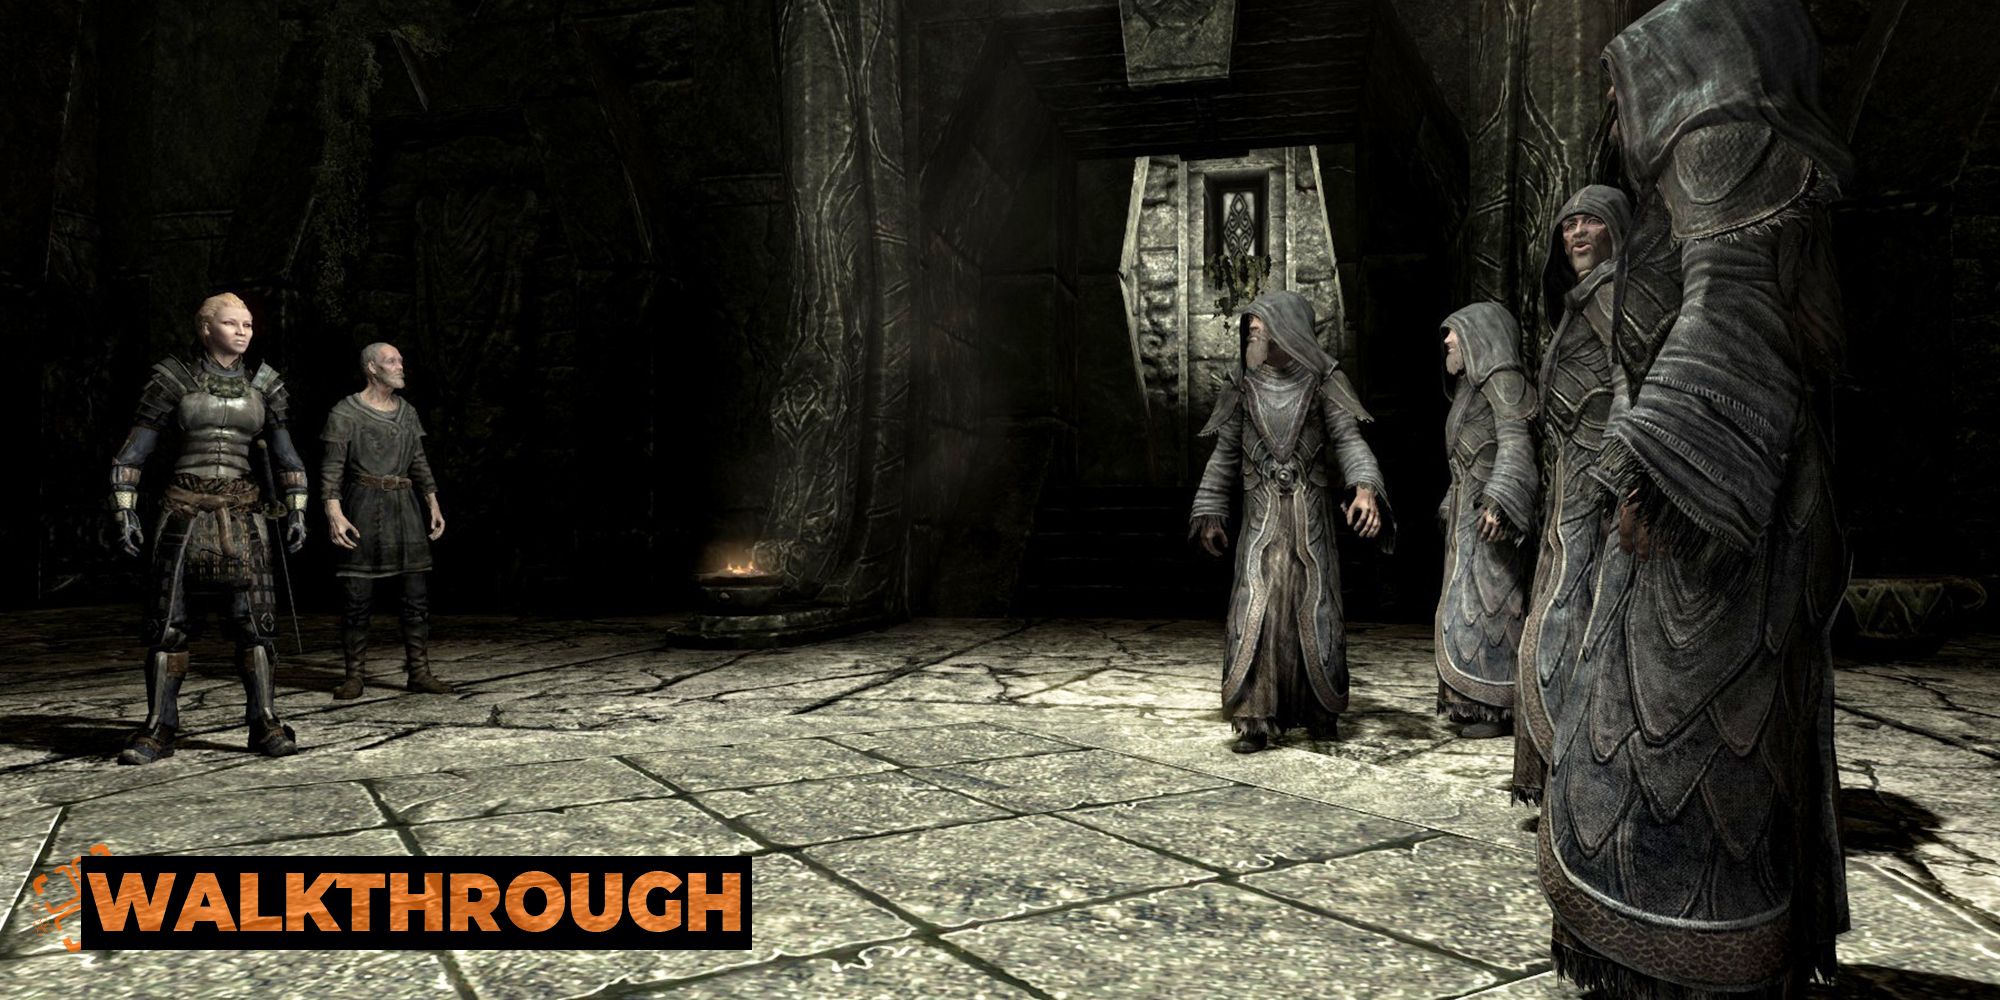 Two people confront a group of hooded monks in a stone monastery 